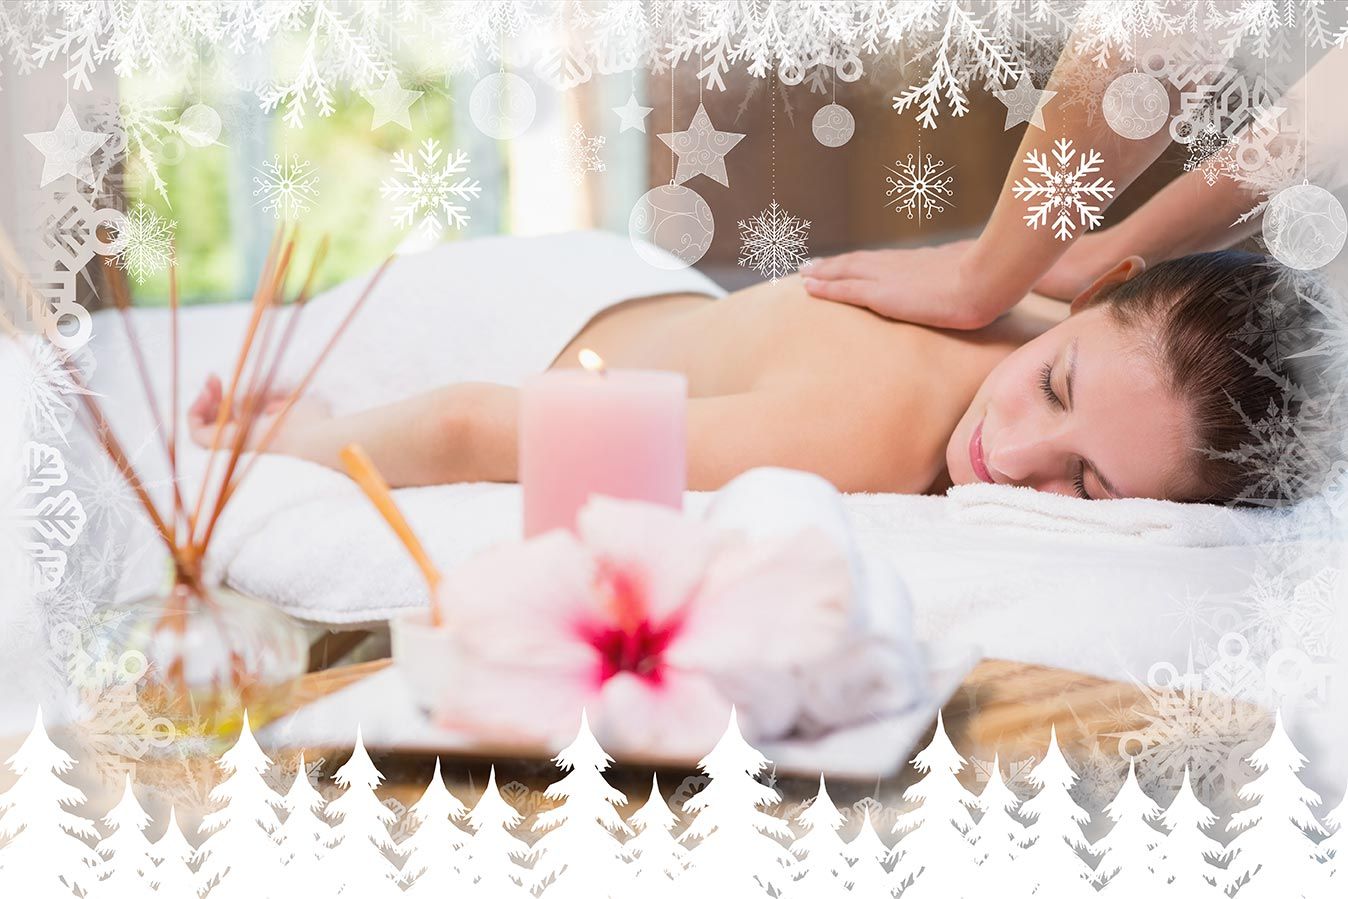 Christmas Packages 2021 at Aristocracy Salon & Day Spa in Plymouth, MA - Spa Towels & Massage OilsChristmas Packages 2021 at Aristocracy Salon & Day Spa in Plymouth, MA - Back Massage